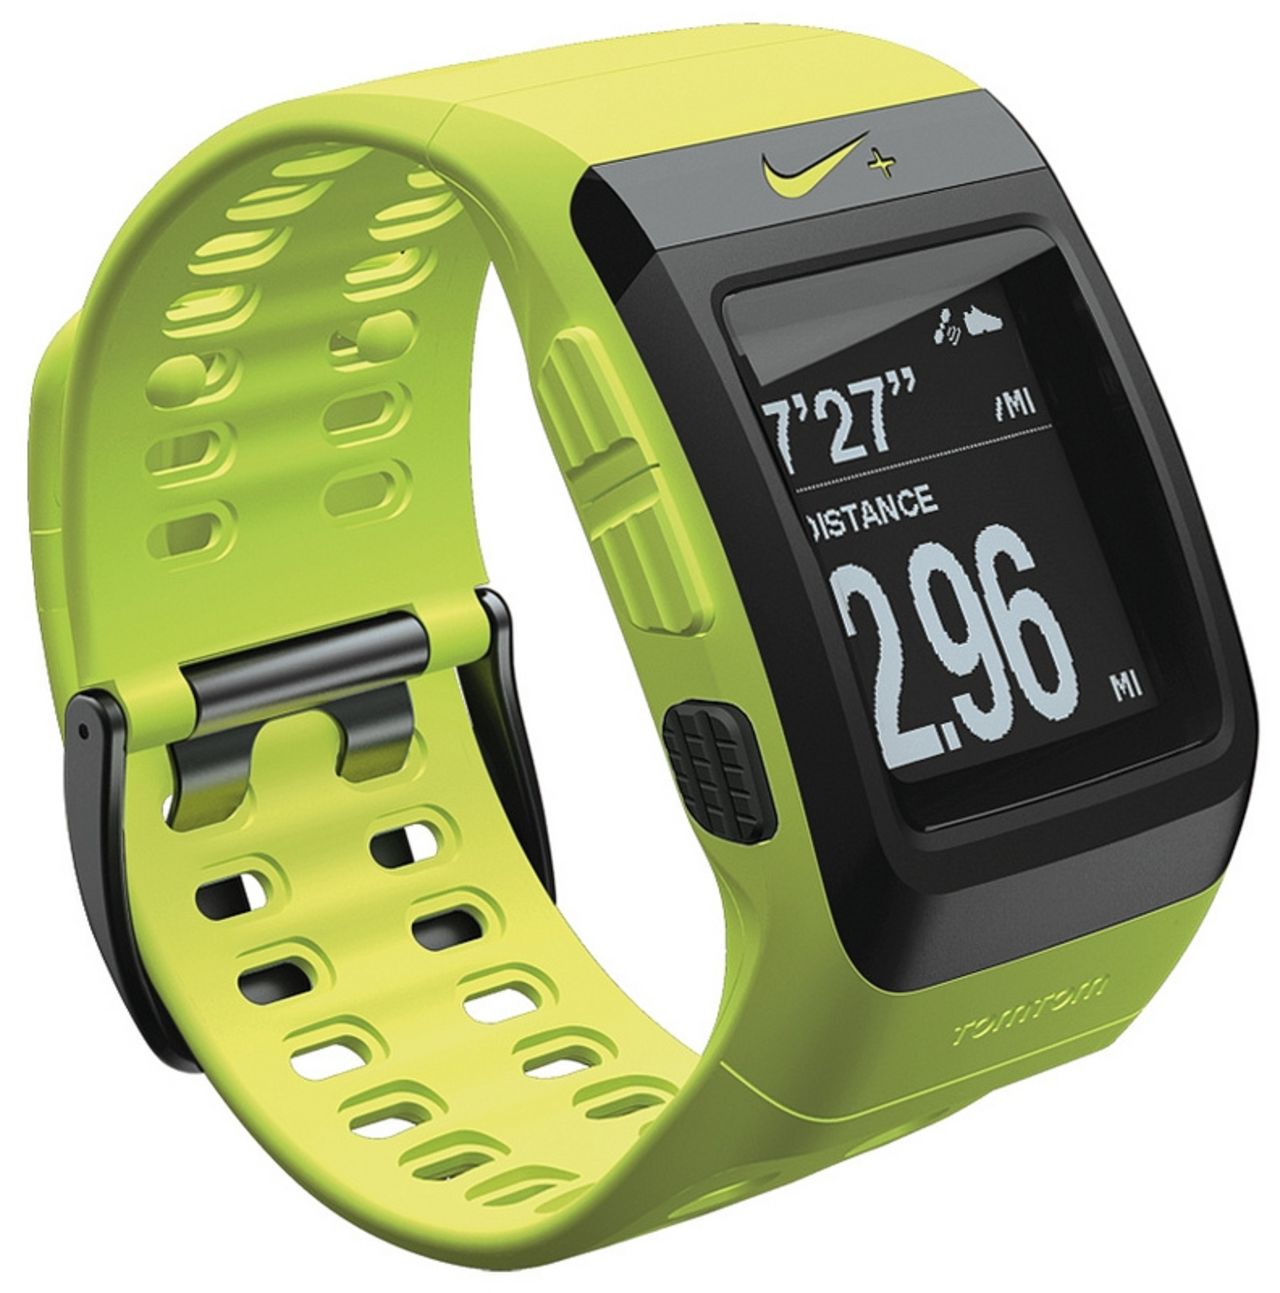 Unveiled by TomTom in 2013, the new Nike+ Sportwatch colors have been chosen to match Nike's apparel and shoe ranges. Features include an extra-large display, a graphical training partner and a one-button control. Colors include black/anthracite, anthracite/blue glow and volt green.